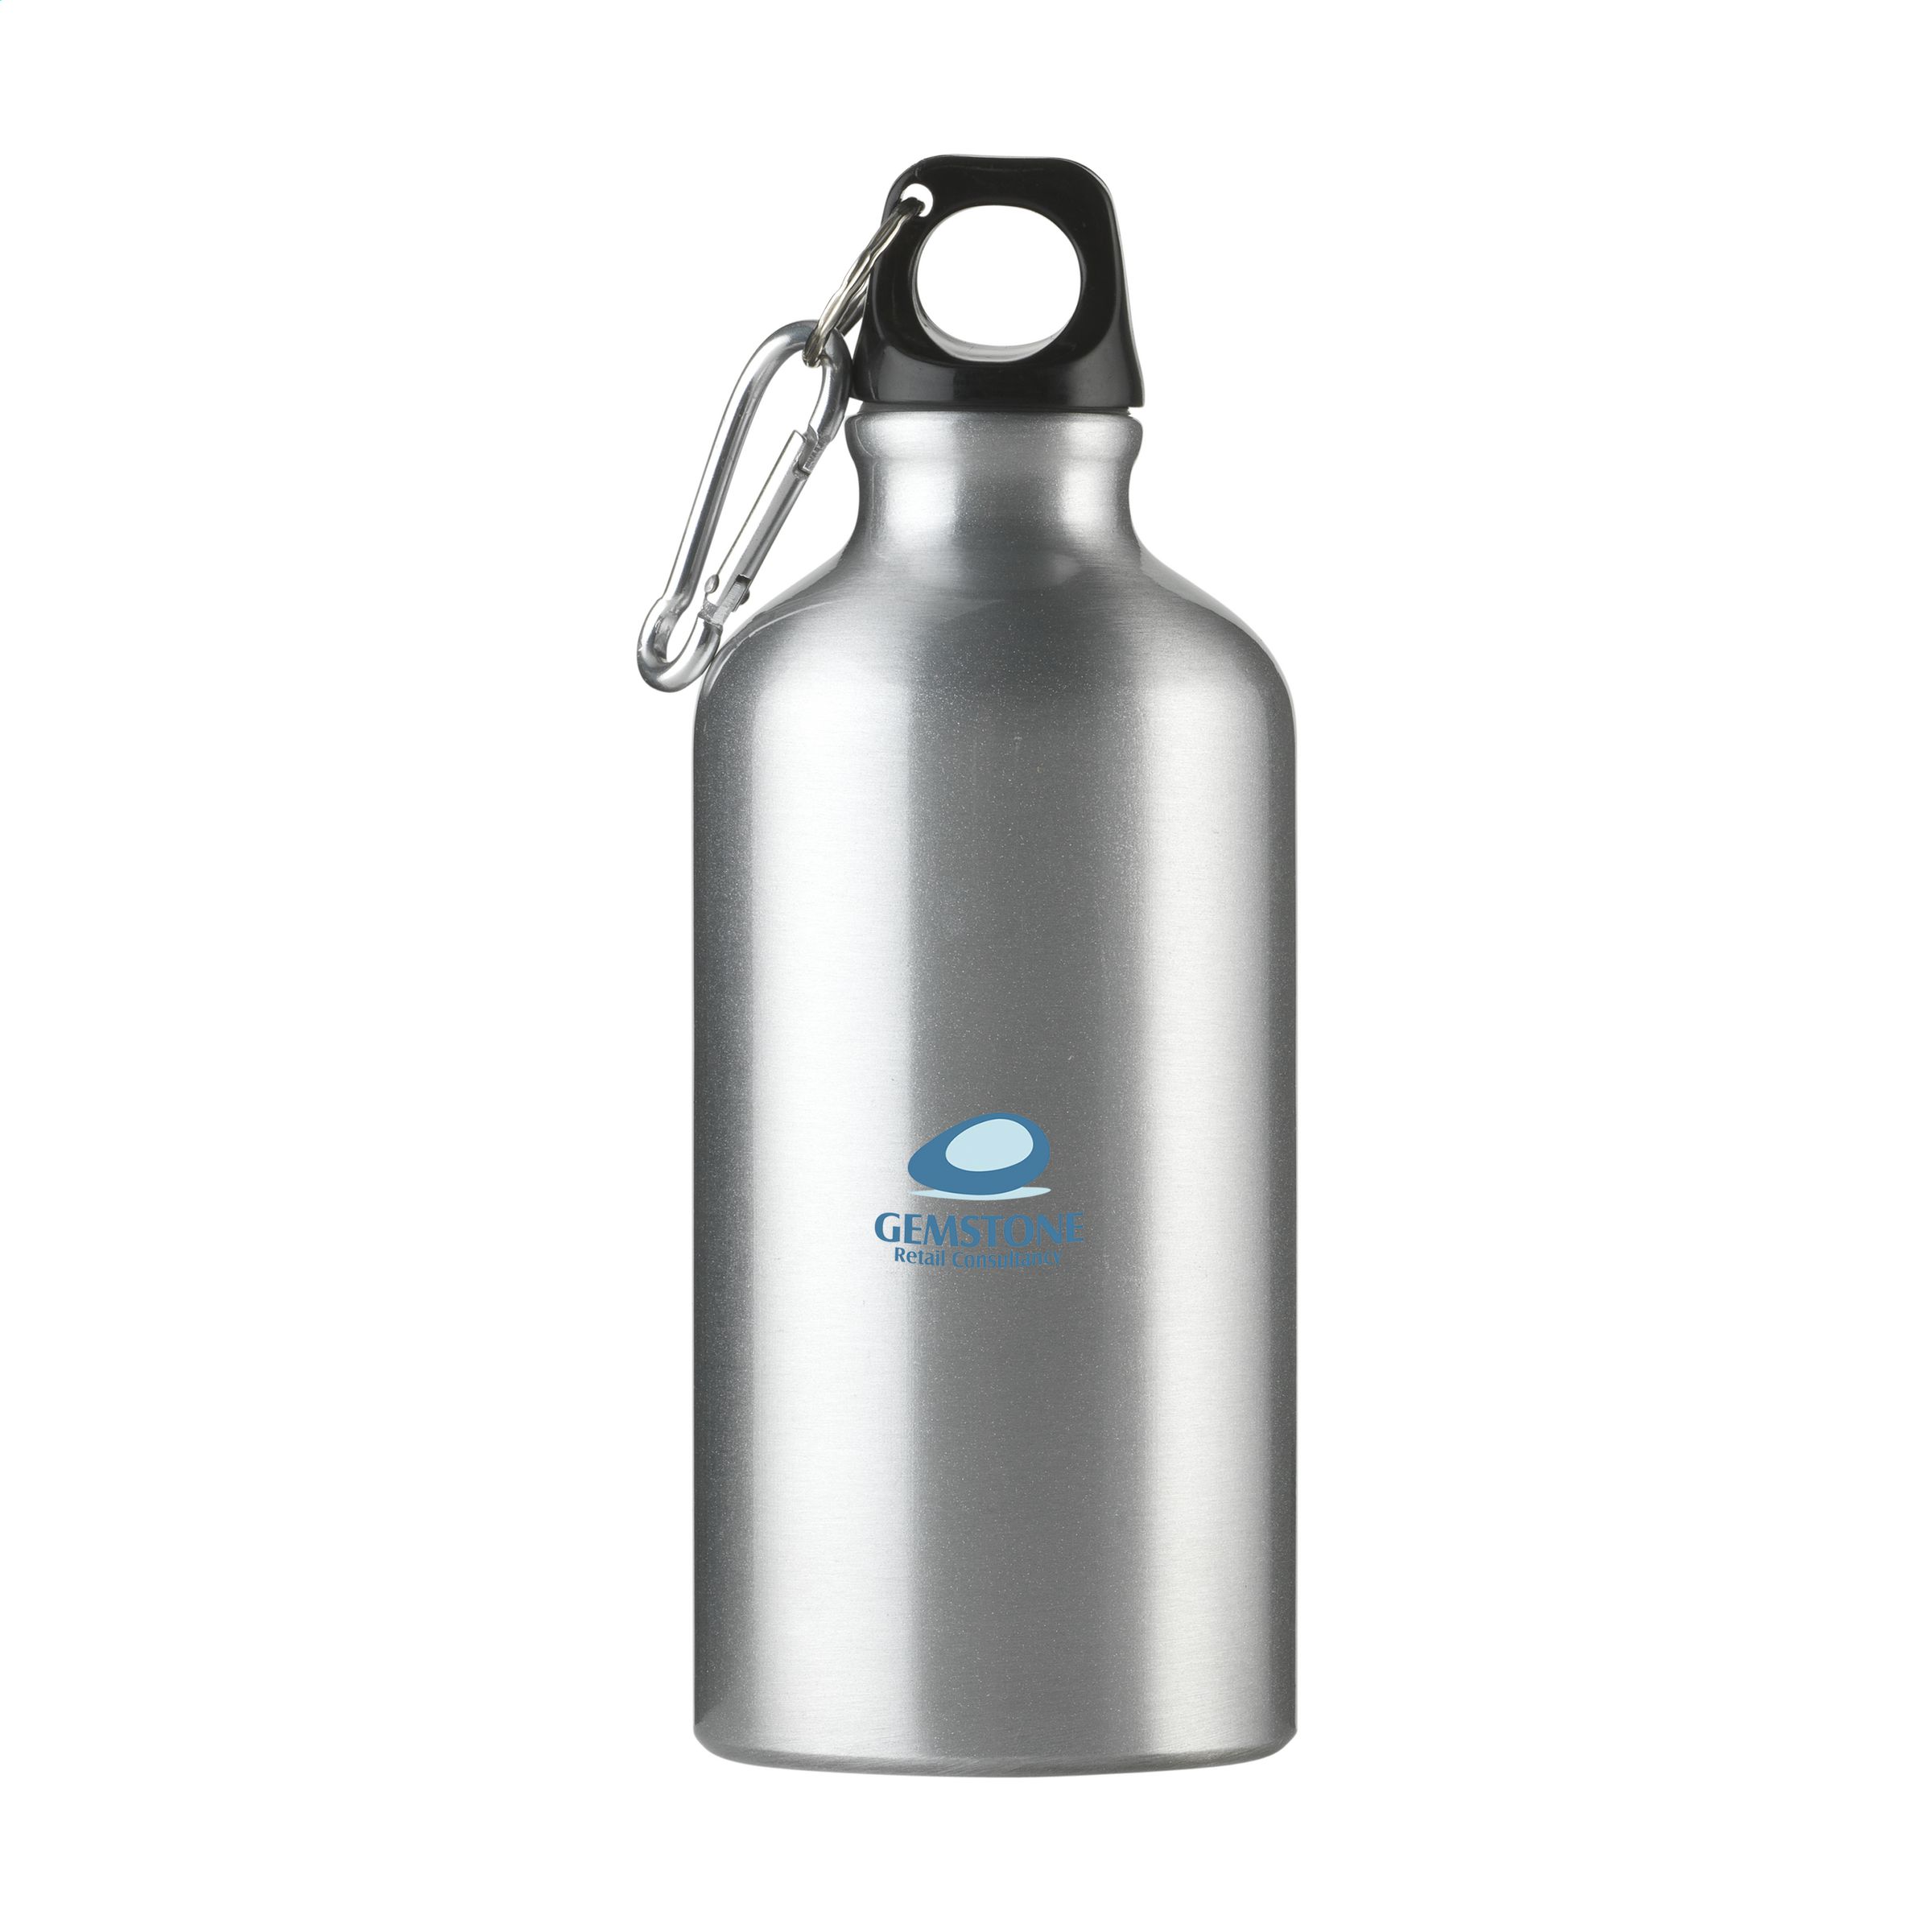 A high-gloss aluminum water bottle that comes with a carabiner - Corby